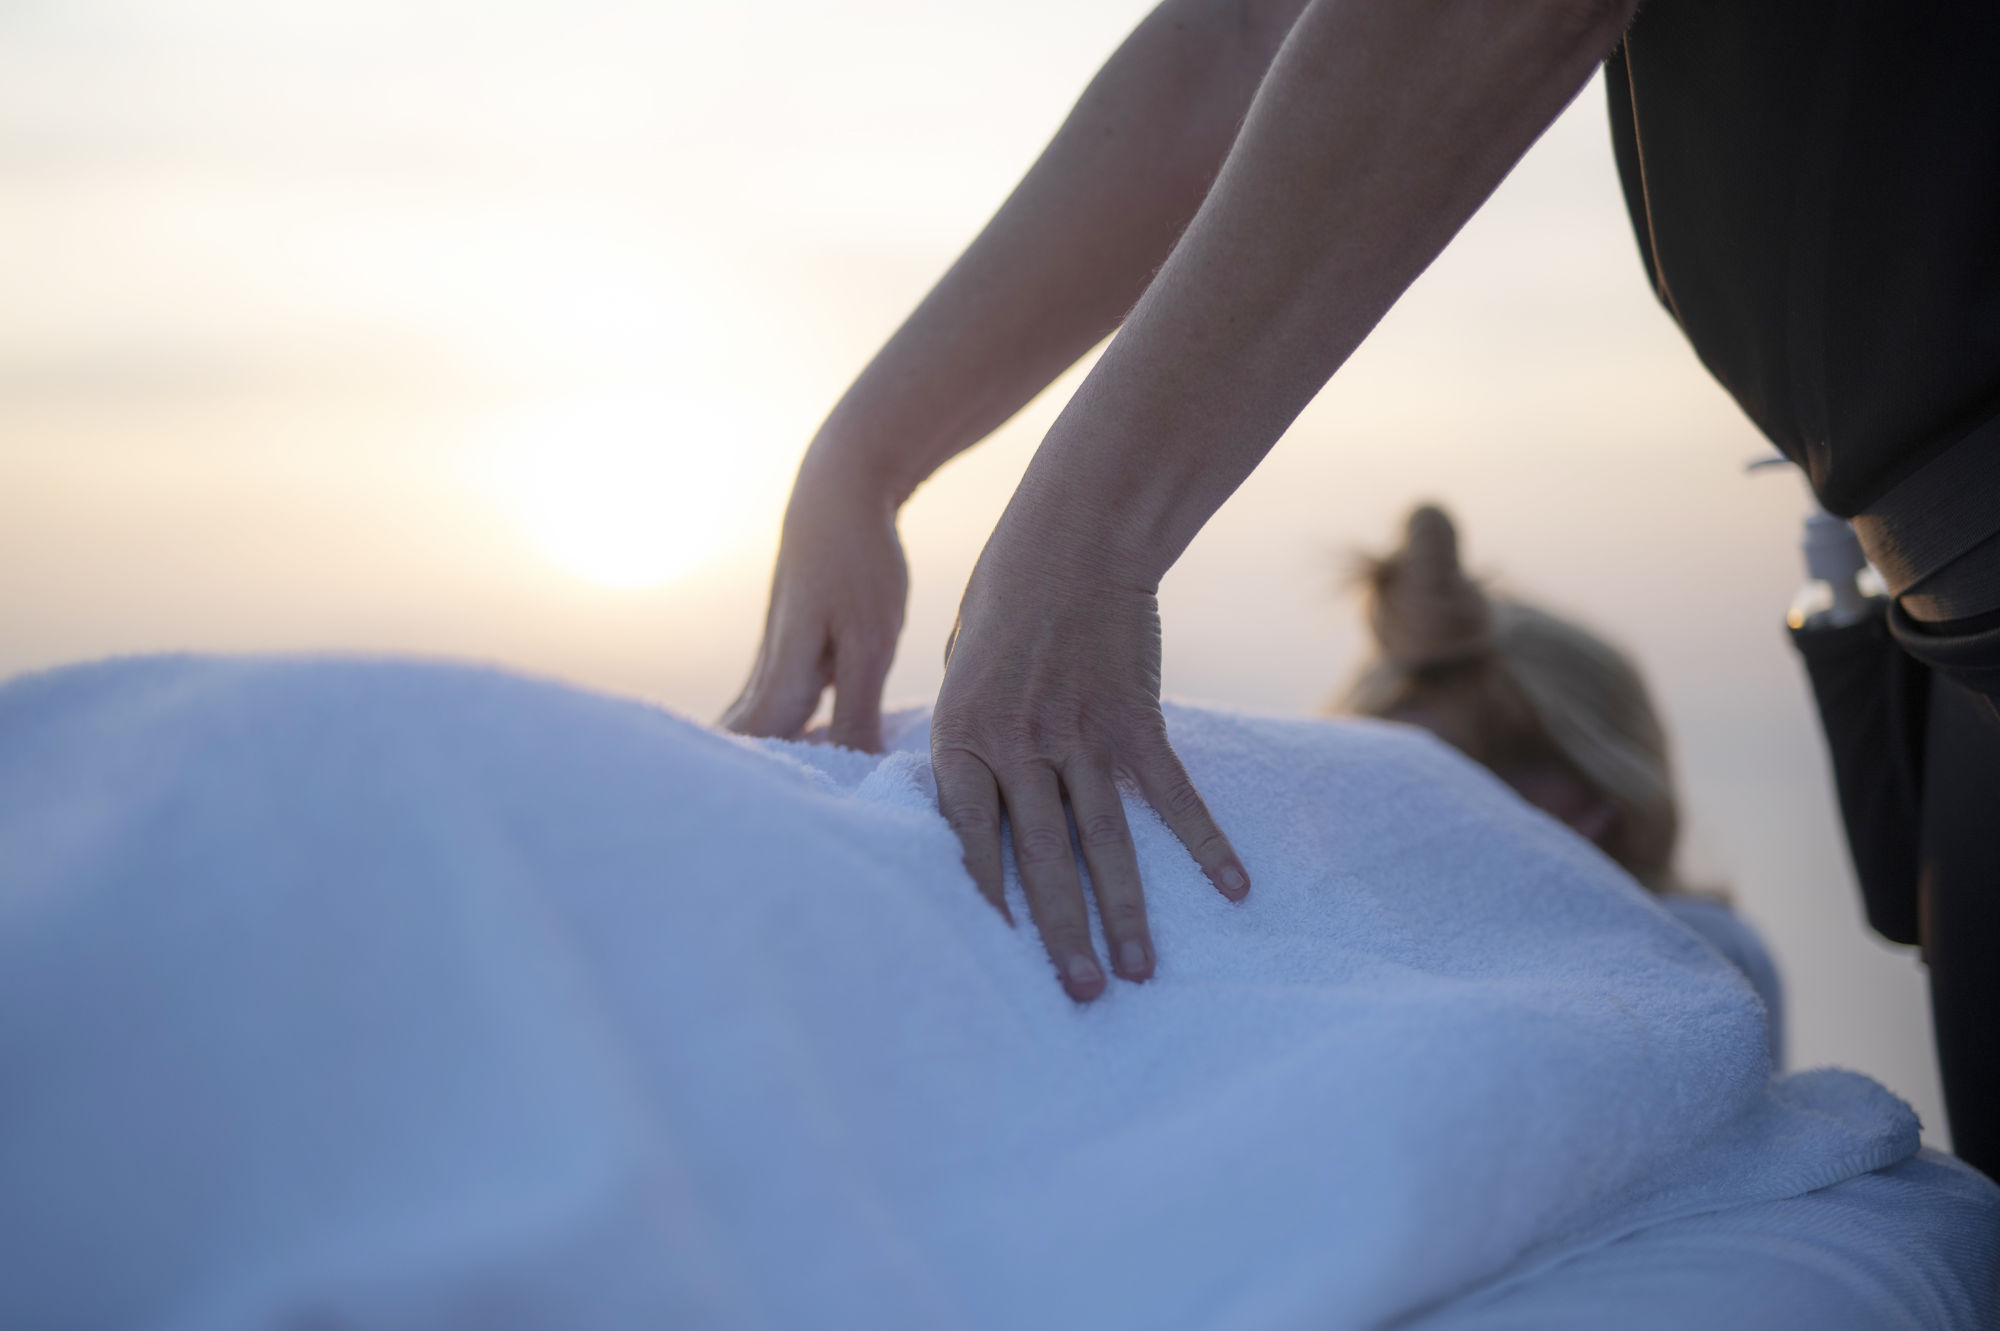 Enhance your well-being with acupressure therapy as expert hands apply precise pressure to key points on the body. Serene image capturing the essence of acupressure, promoting relaxation and holistic health in Santorini.